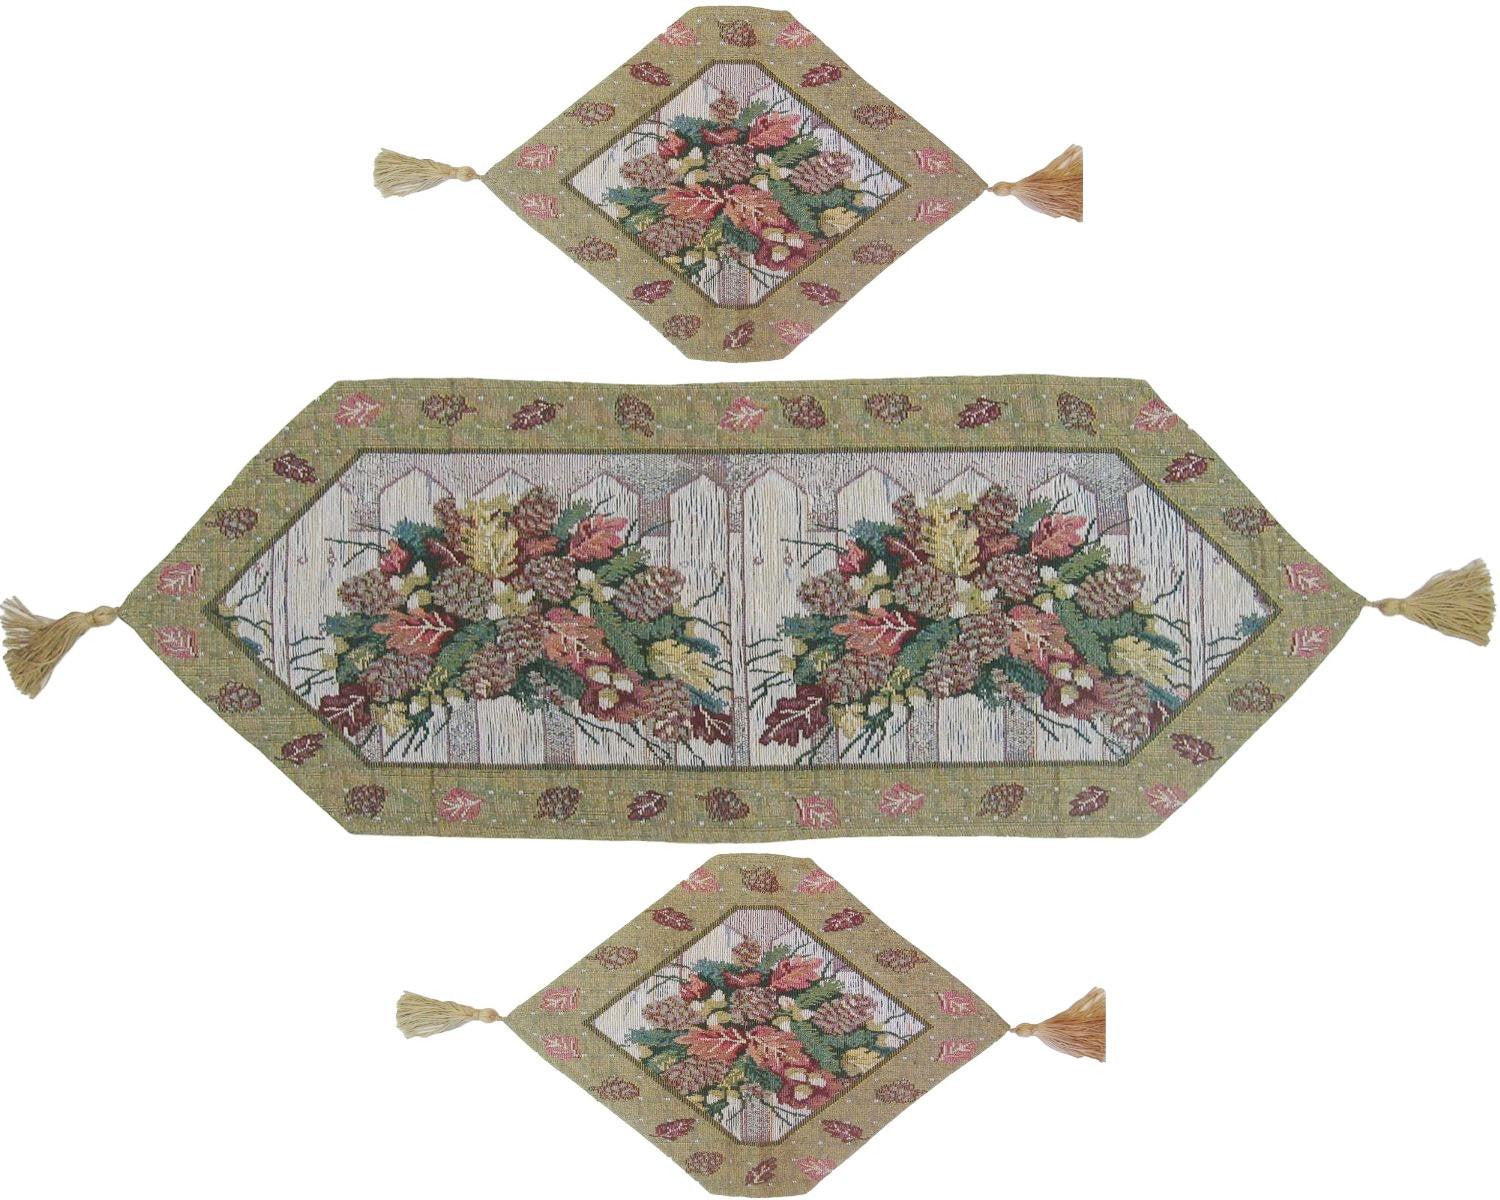 Merry Christmas Fiesta Floral Beige Tan Hand-Crafted Woven Tapestry Desk Dining Table Runners (6068) - Stores Basement - Discount Bedding